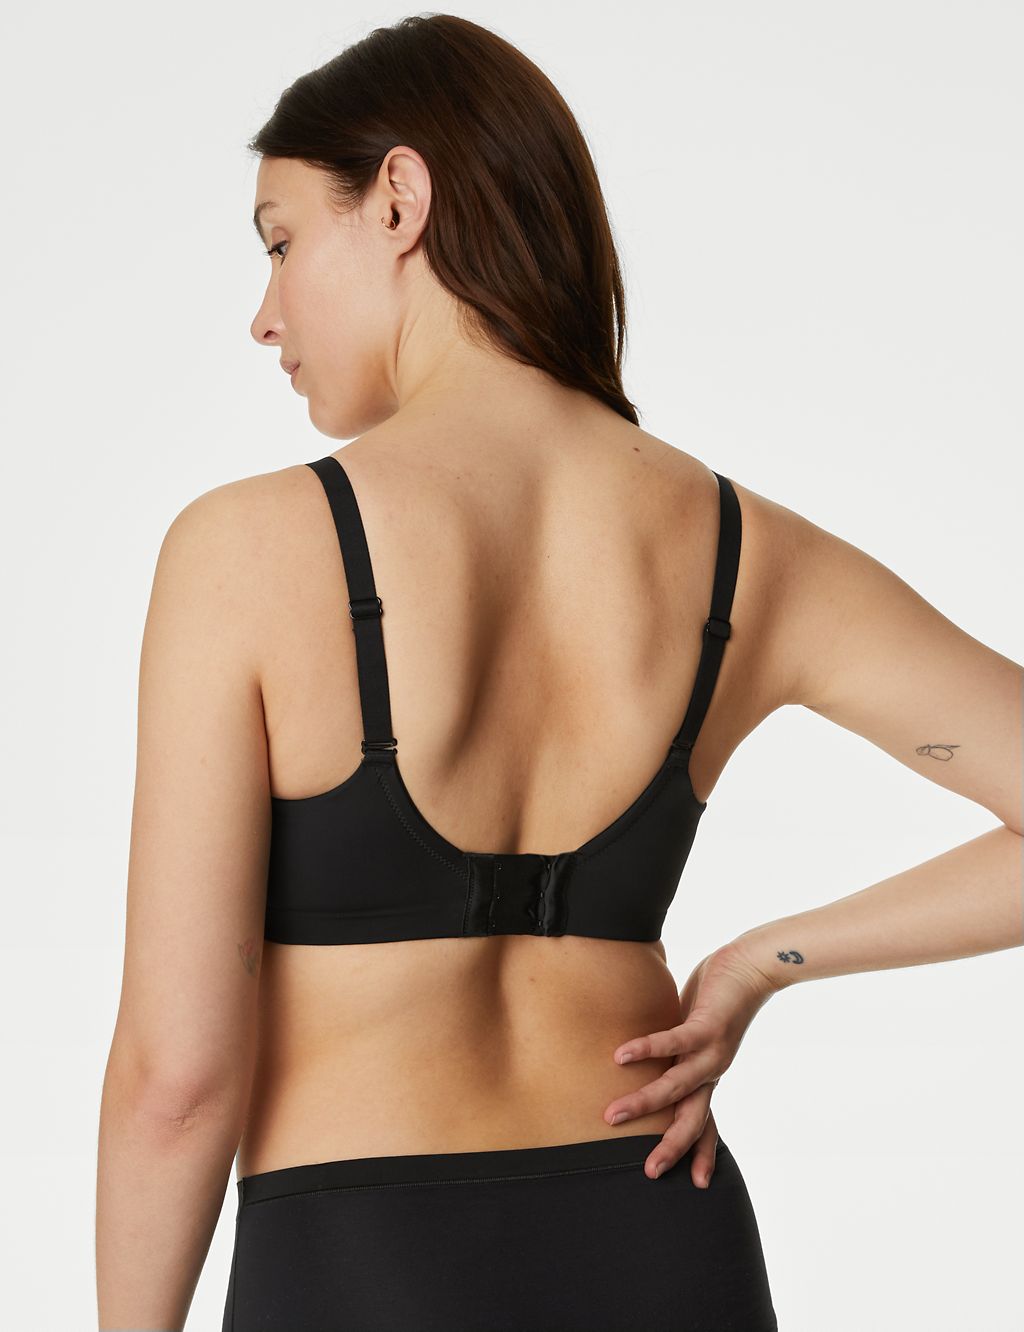 Flexifit™ Non-Wired Full Cup Bra F-H 6 of 7